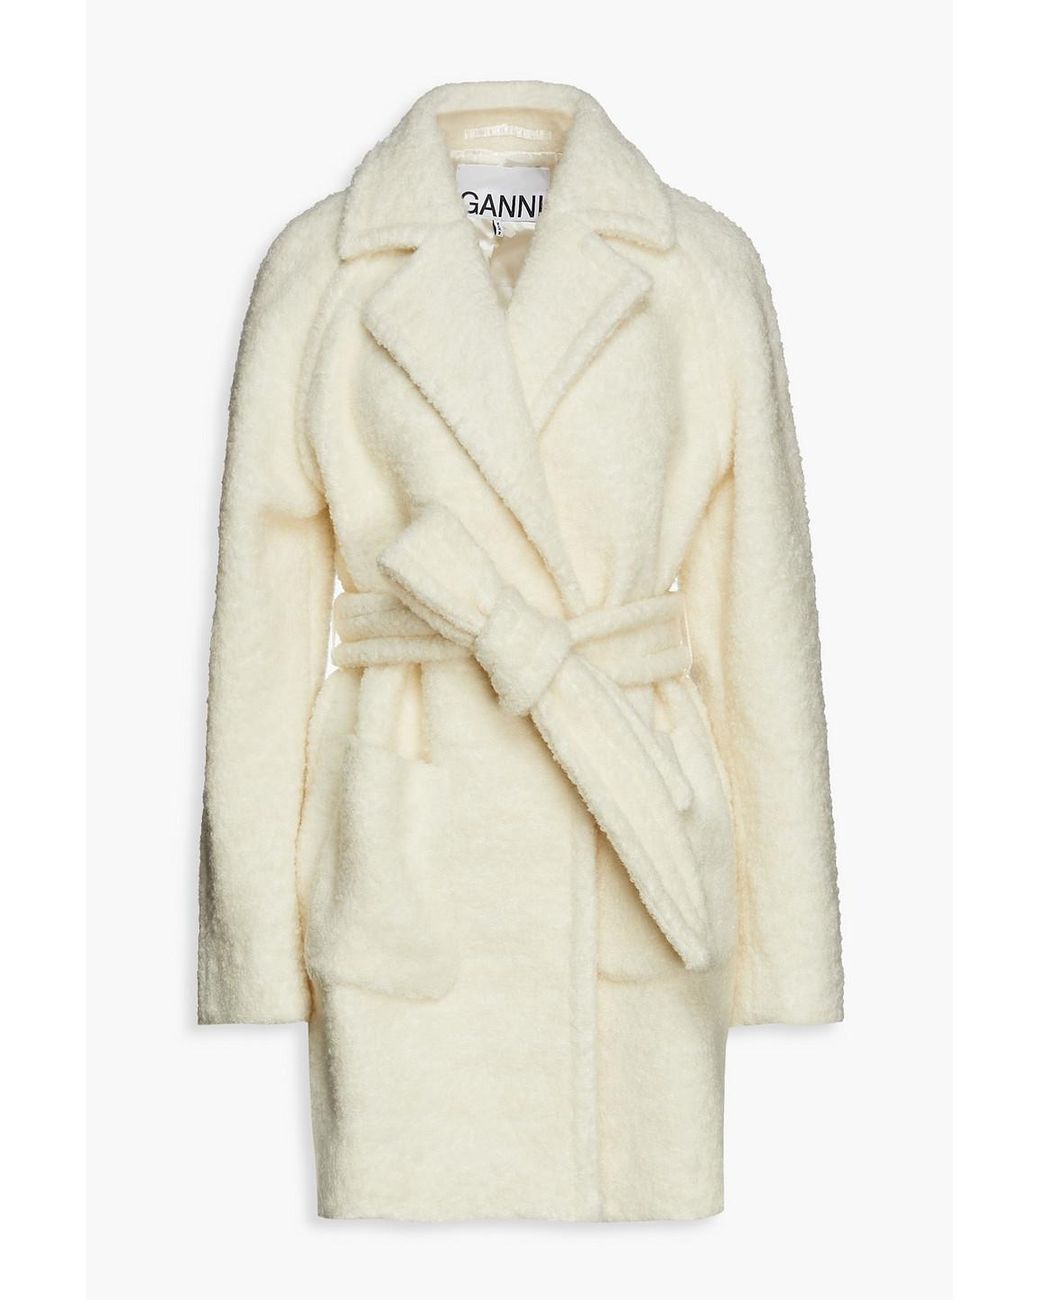 Ganni Double-breasted Wool-blend Bouclé Coat in White | Lyst